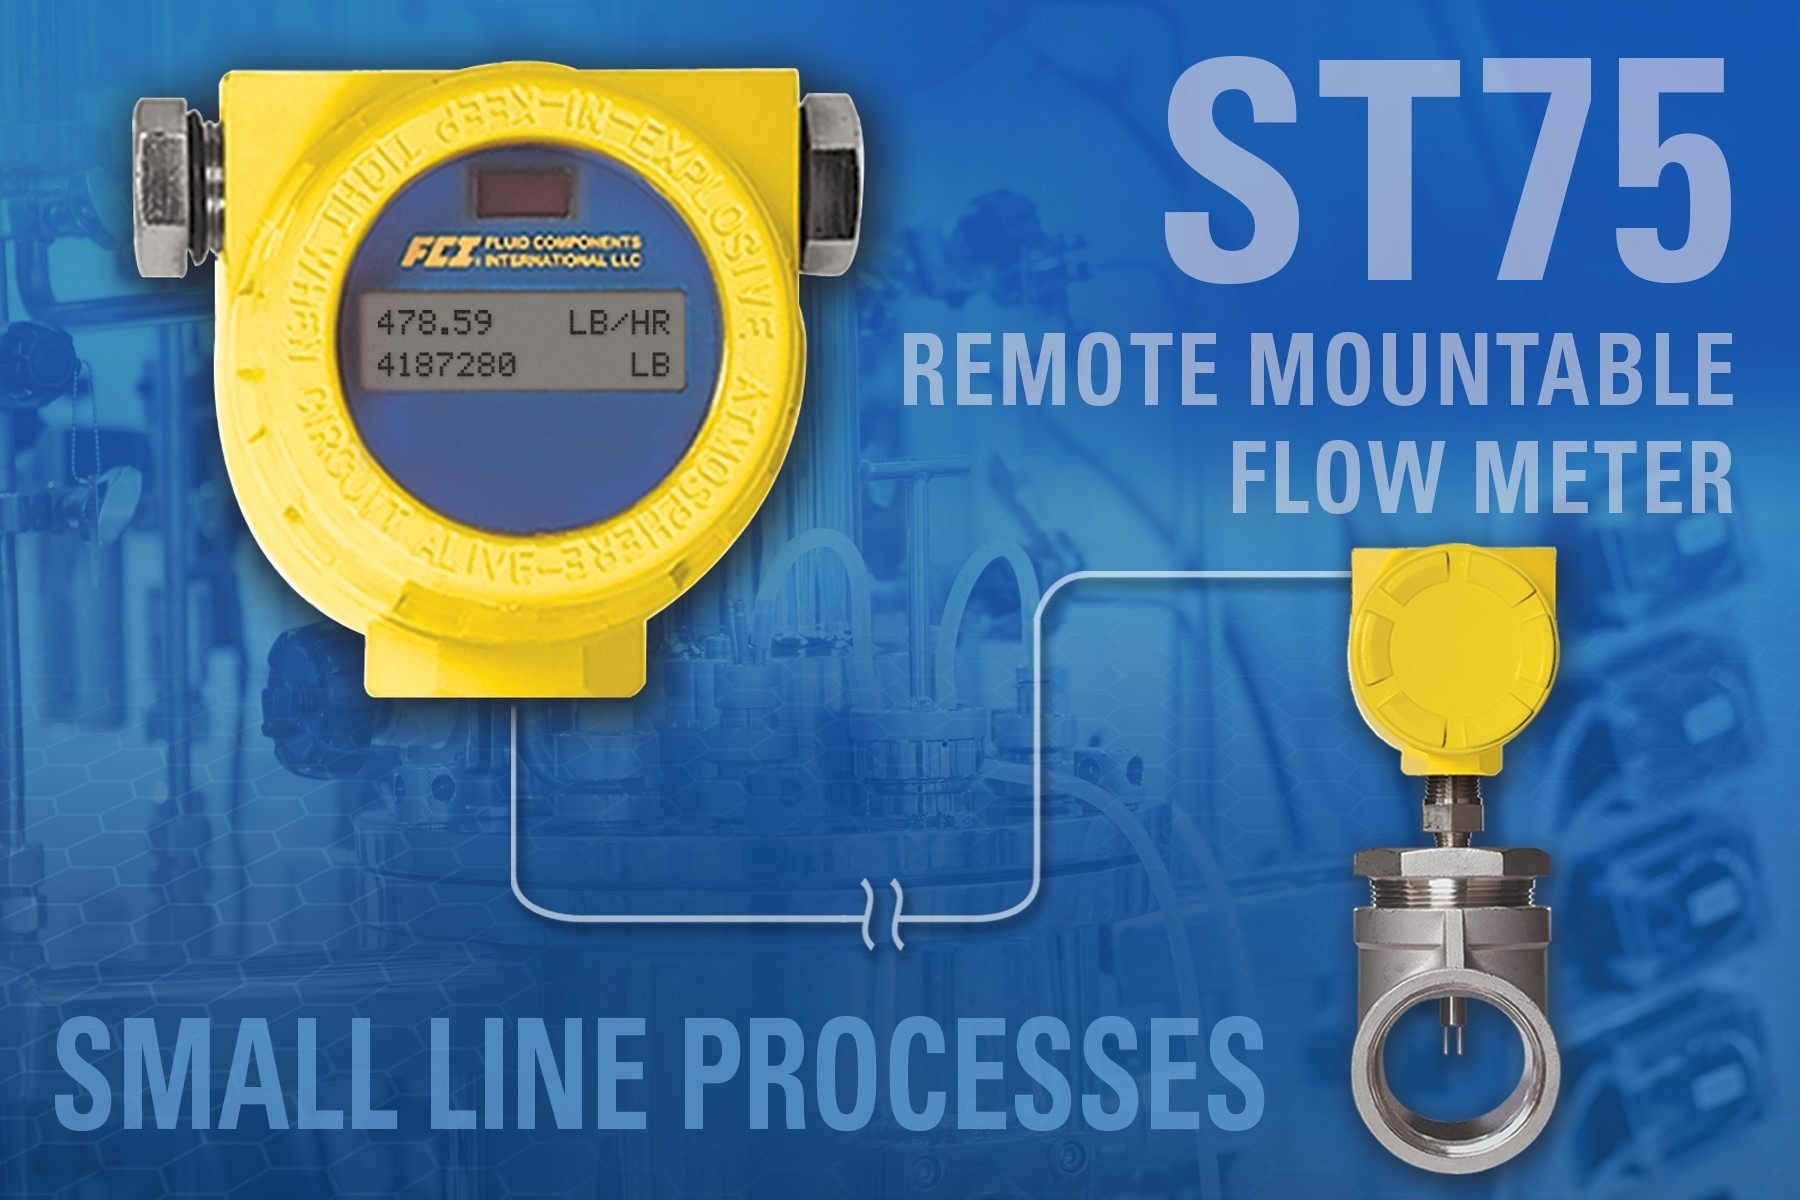 Remote Mountable Flow Meter for Small Line Processes In Hazardous Or Hard-To-Reach Locations